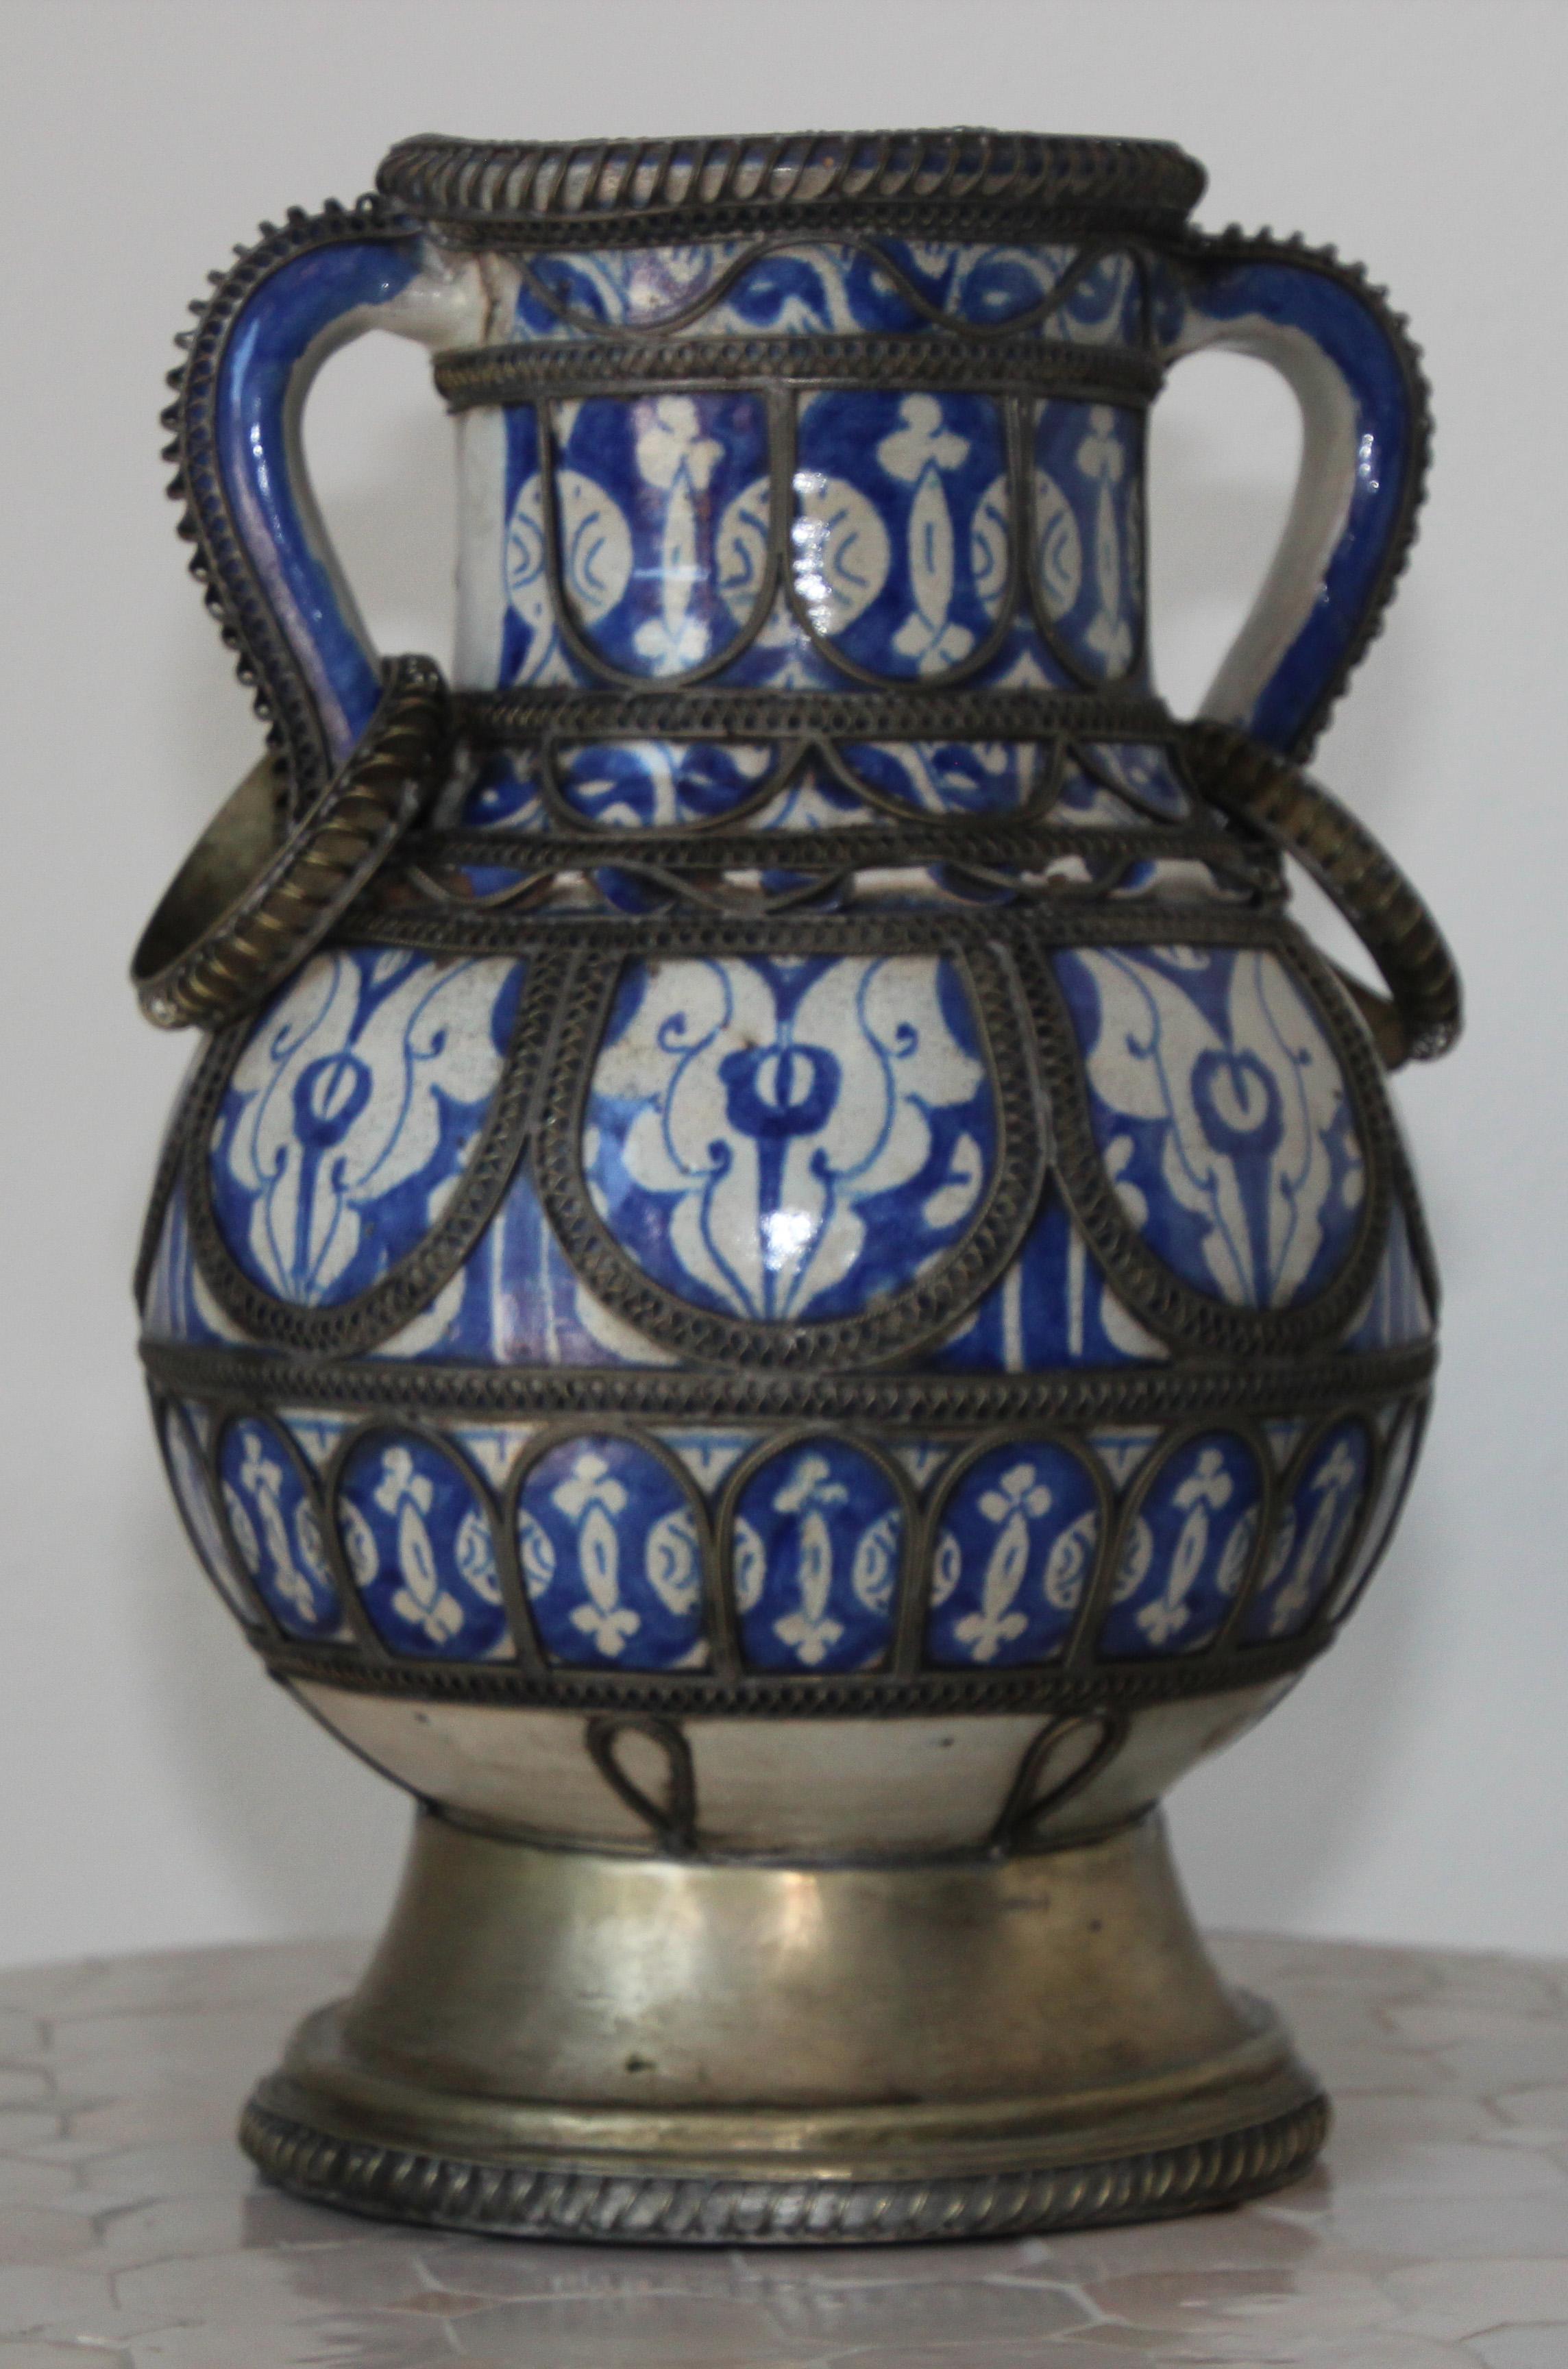  Moroccan Blue & White Ceramic Footed Vase from Fez with Silver Filigree For Sale 3